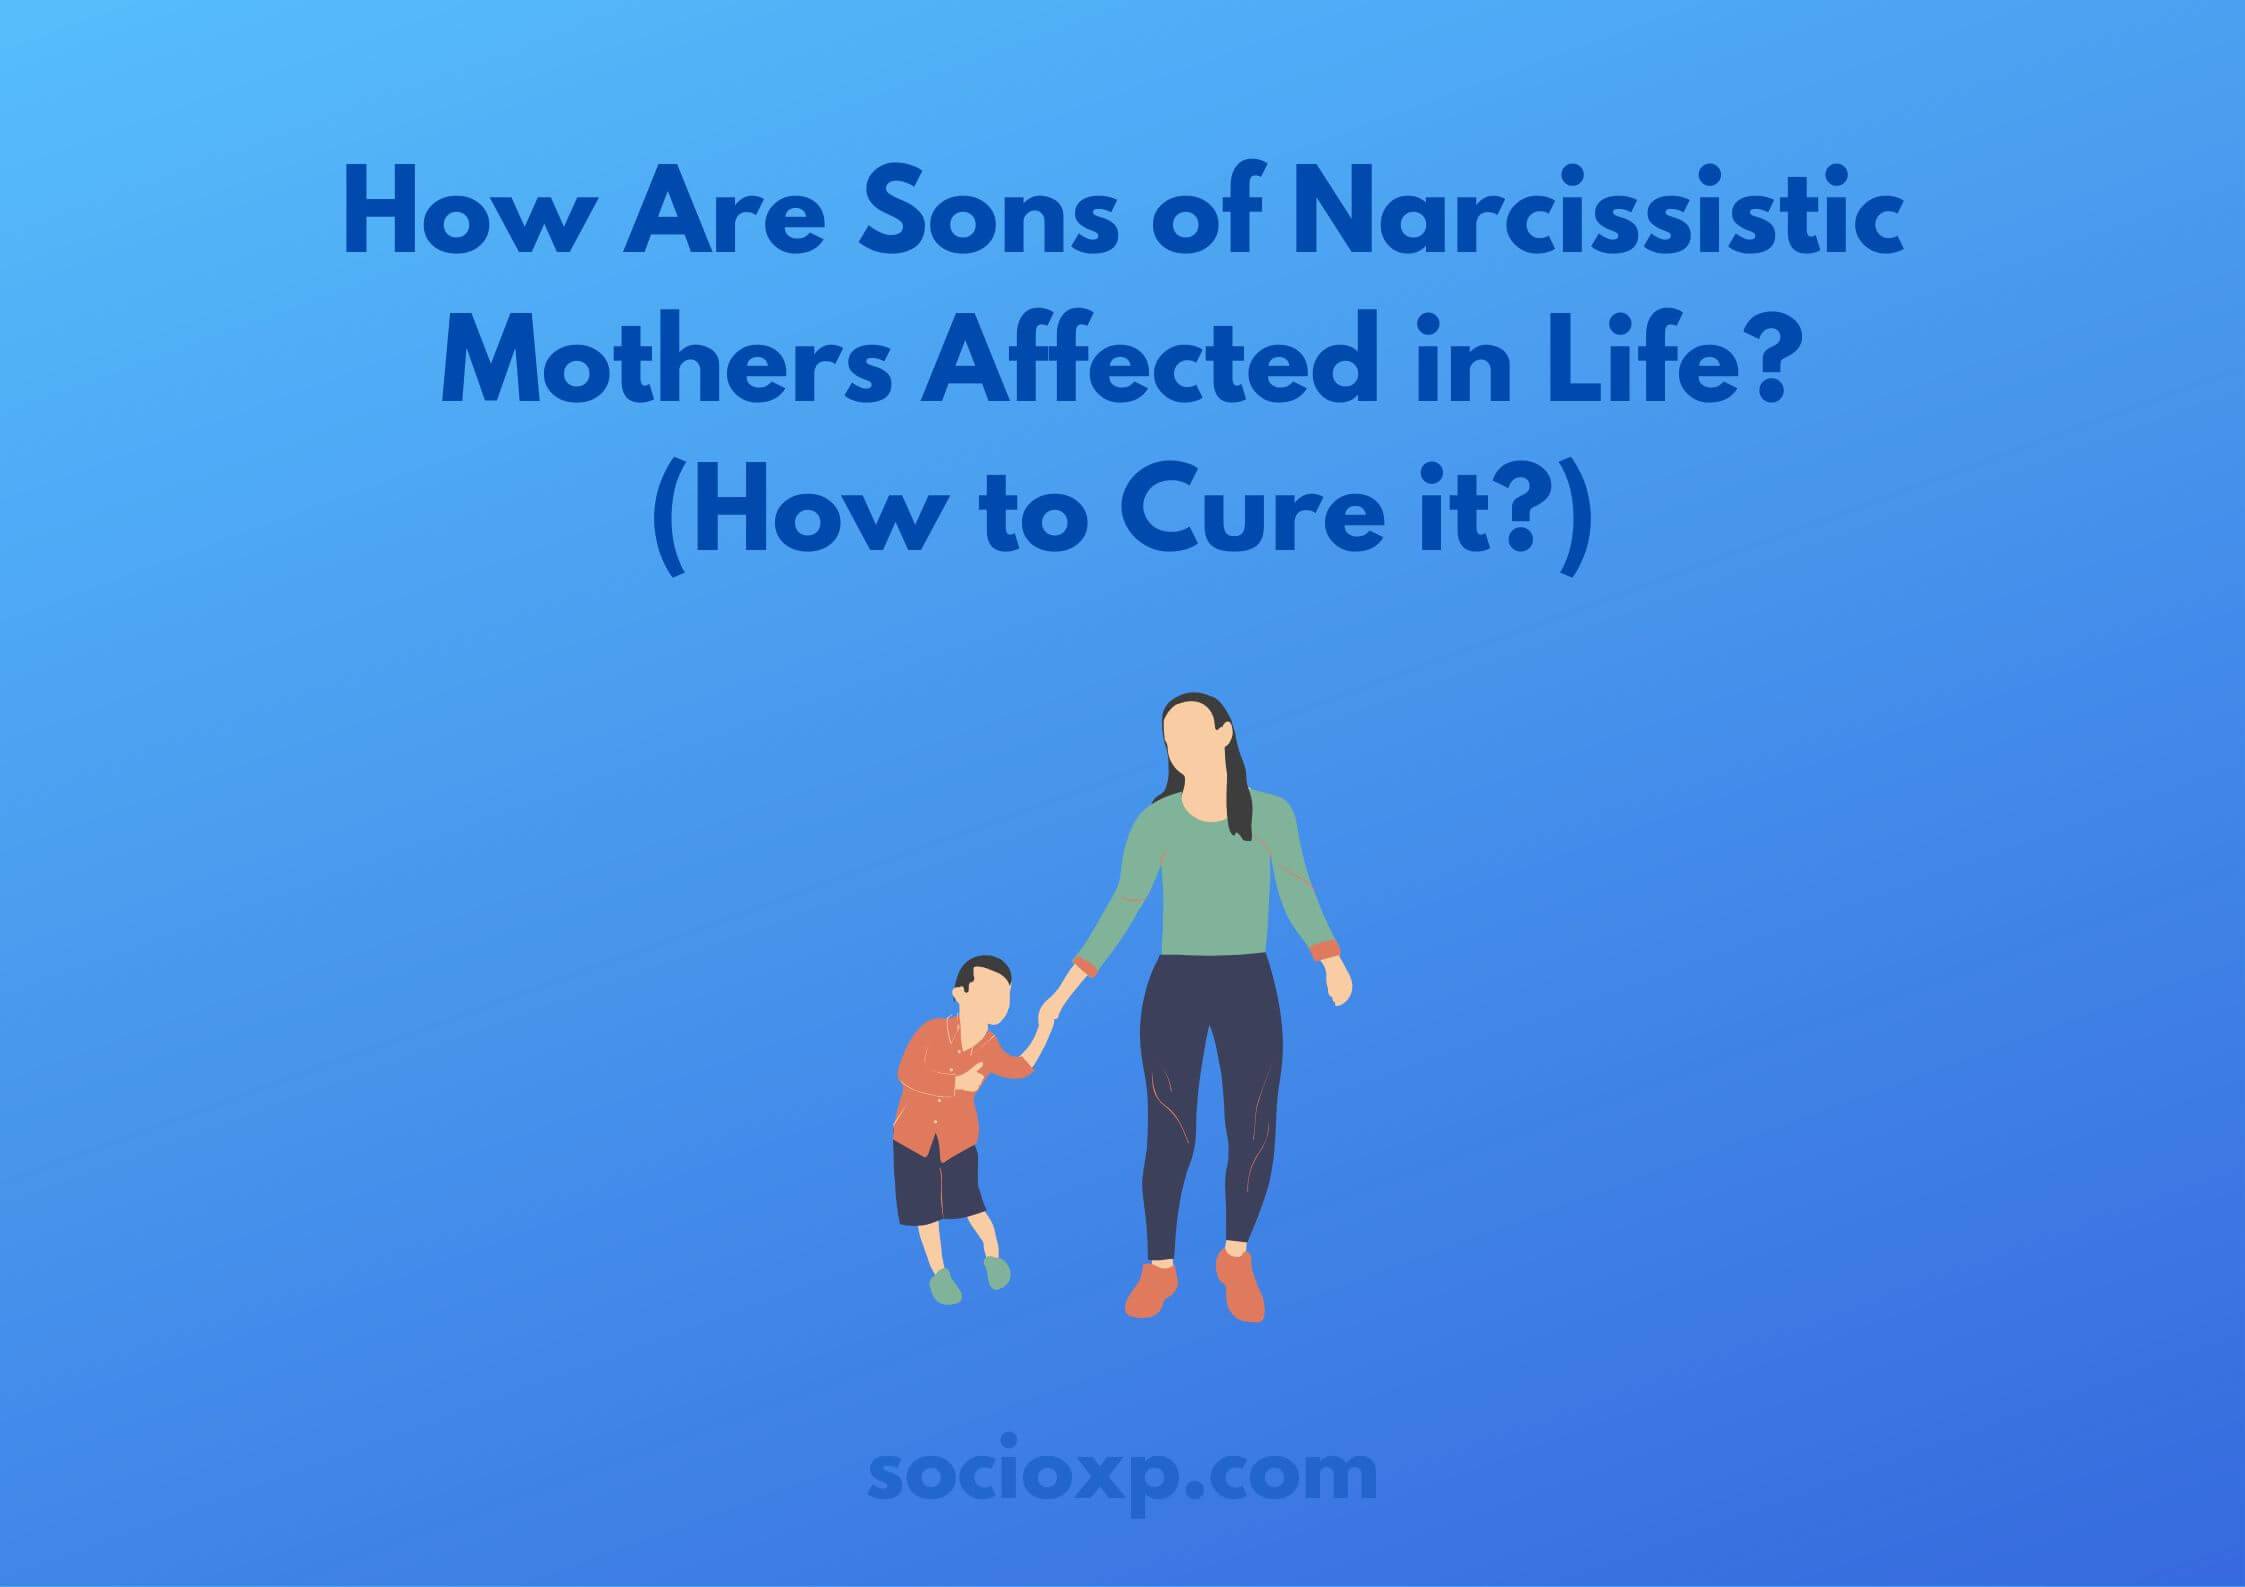 How Are Sons of Narcissistic Mothers Affected in Life? (How to Cure it?)